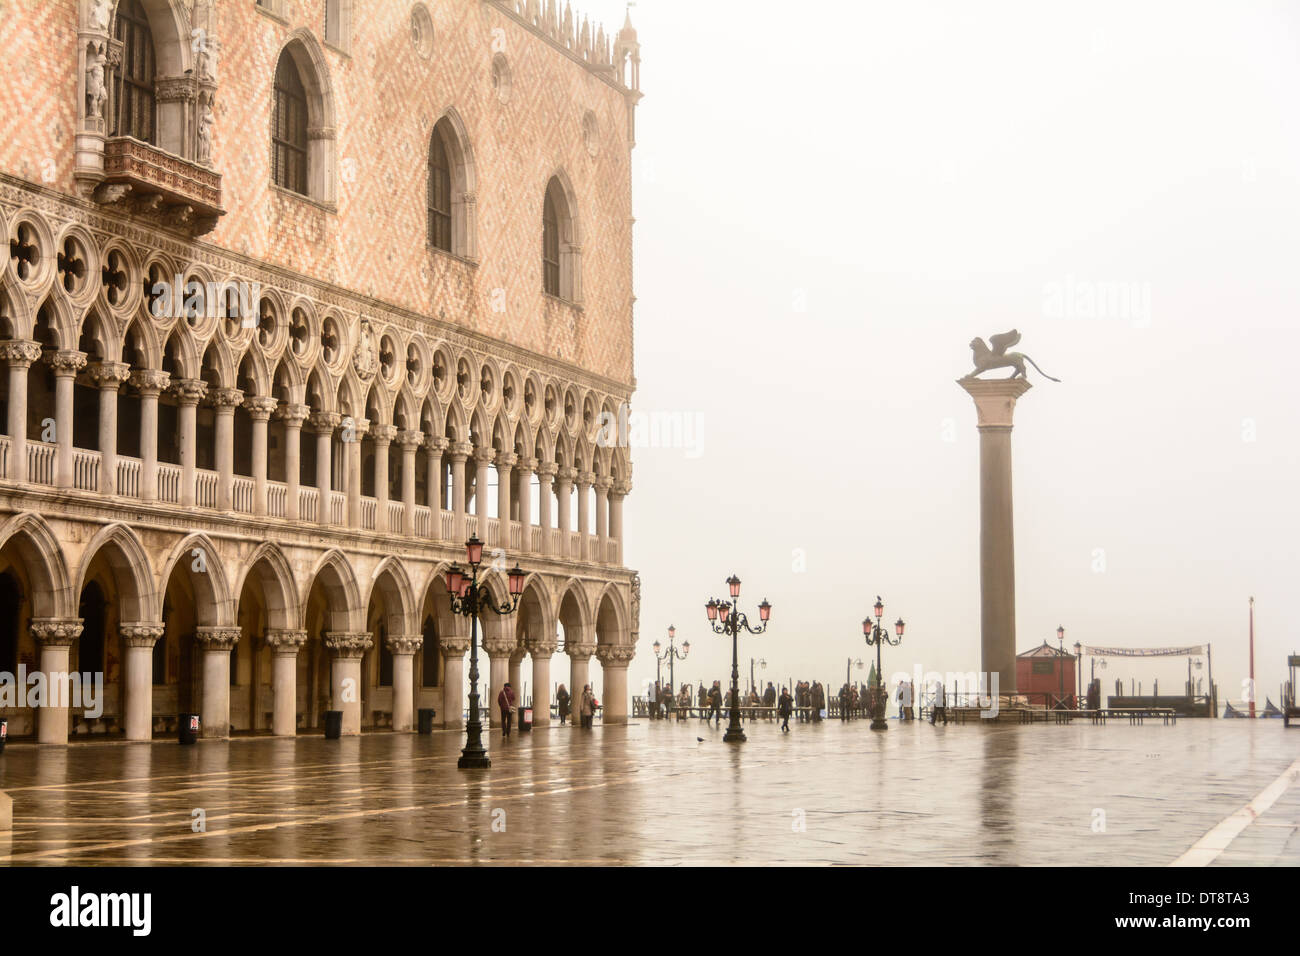 Venice, Italy. Piazzetta San Marco, St Mark´s Square on a rainy overcast day with reflections in the pavement. Stock Photo